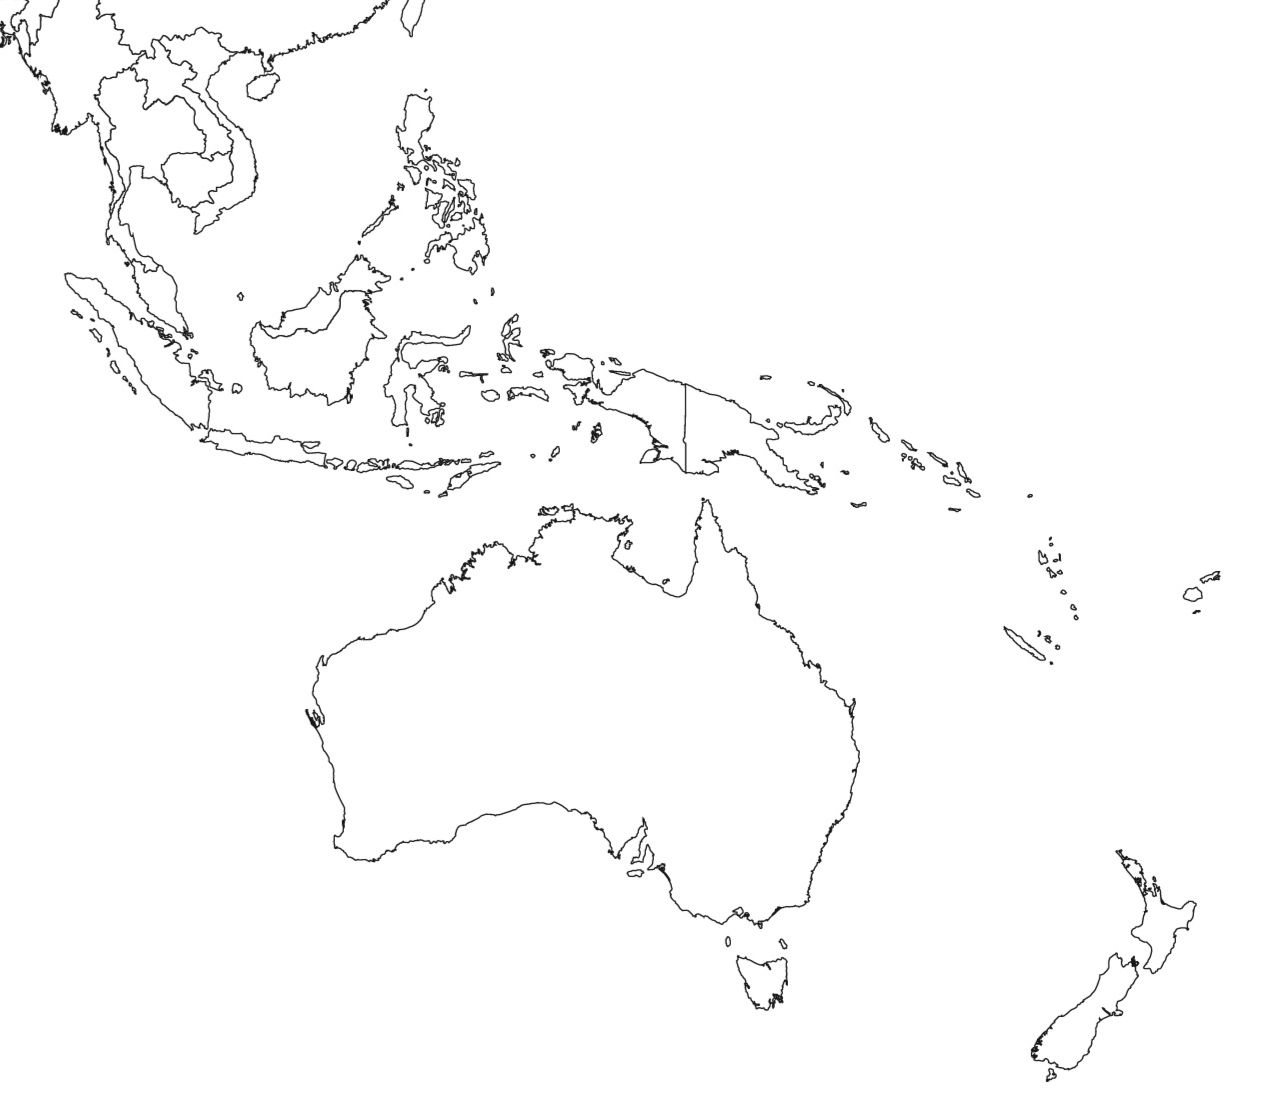 Asia map. Map of Asia Pacific. Oceania map. High quality vector